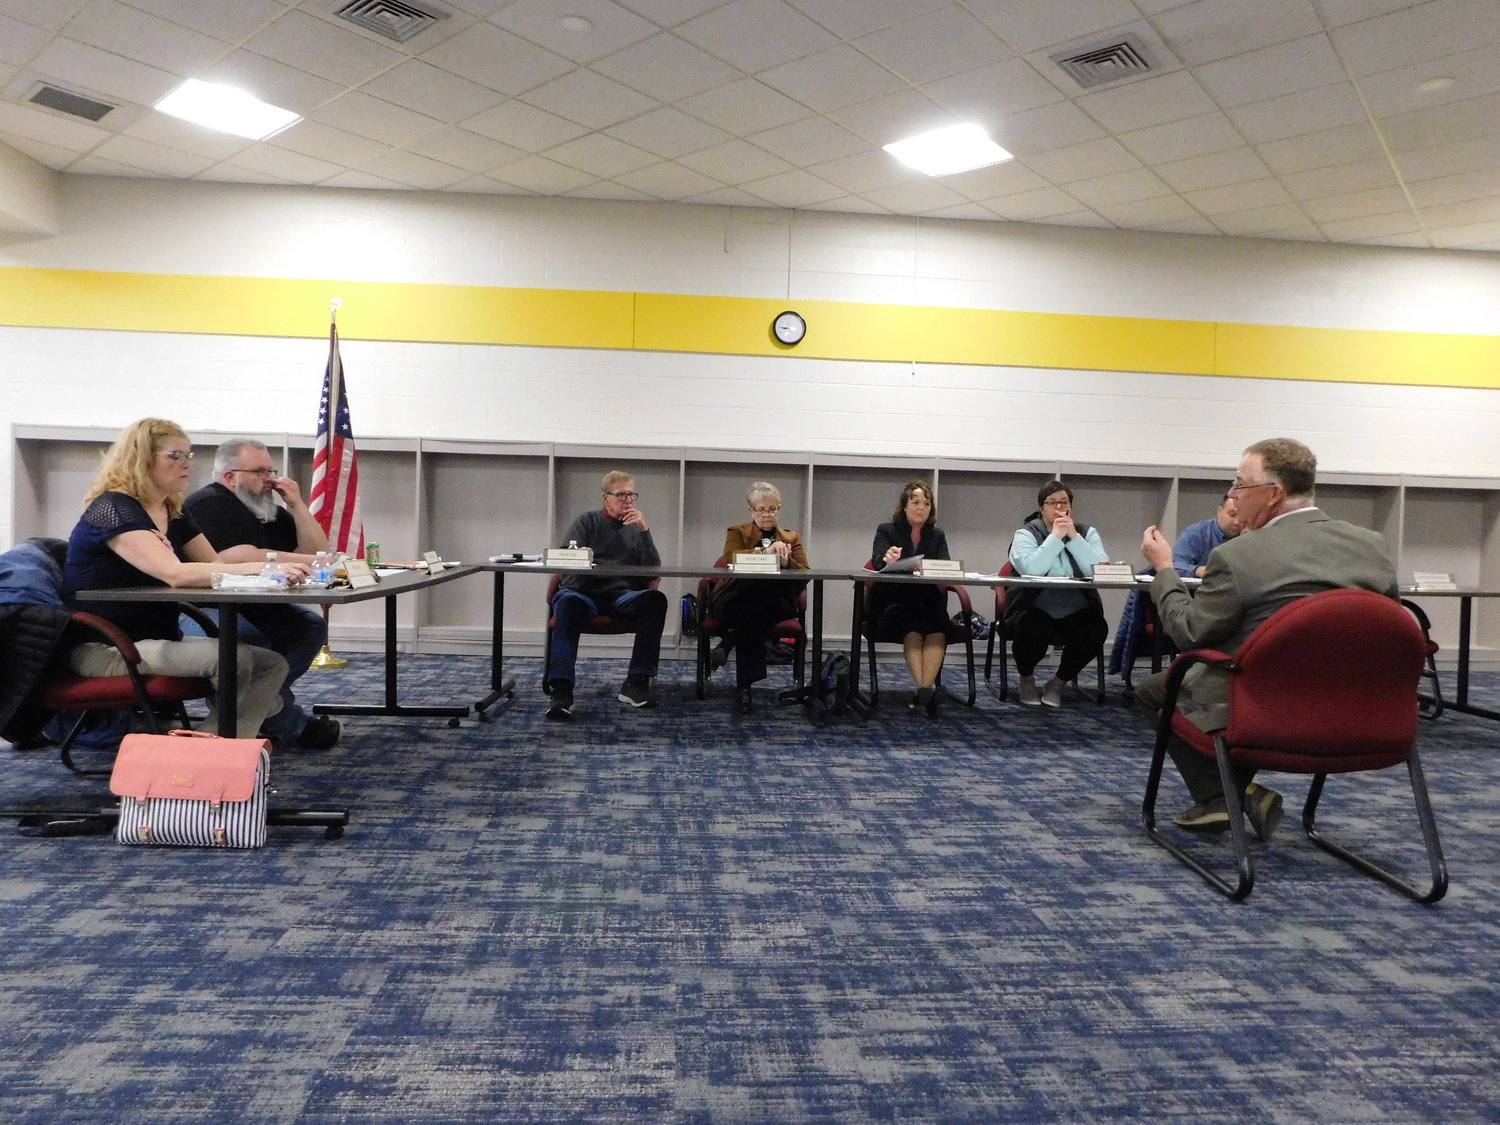 Dave Moore, Michigan Association of School Boards representative, continued his guidance as he urged board members to be realistic about their choices.